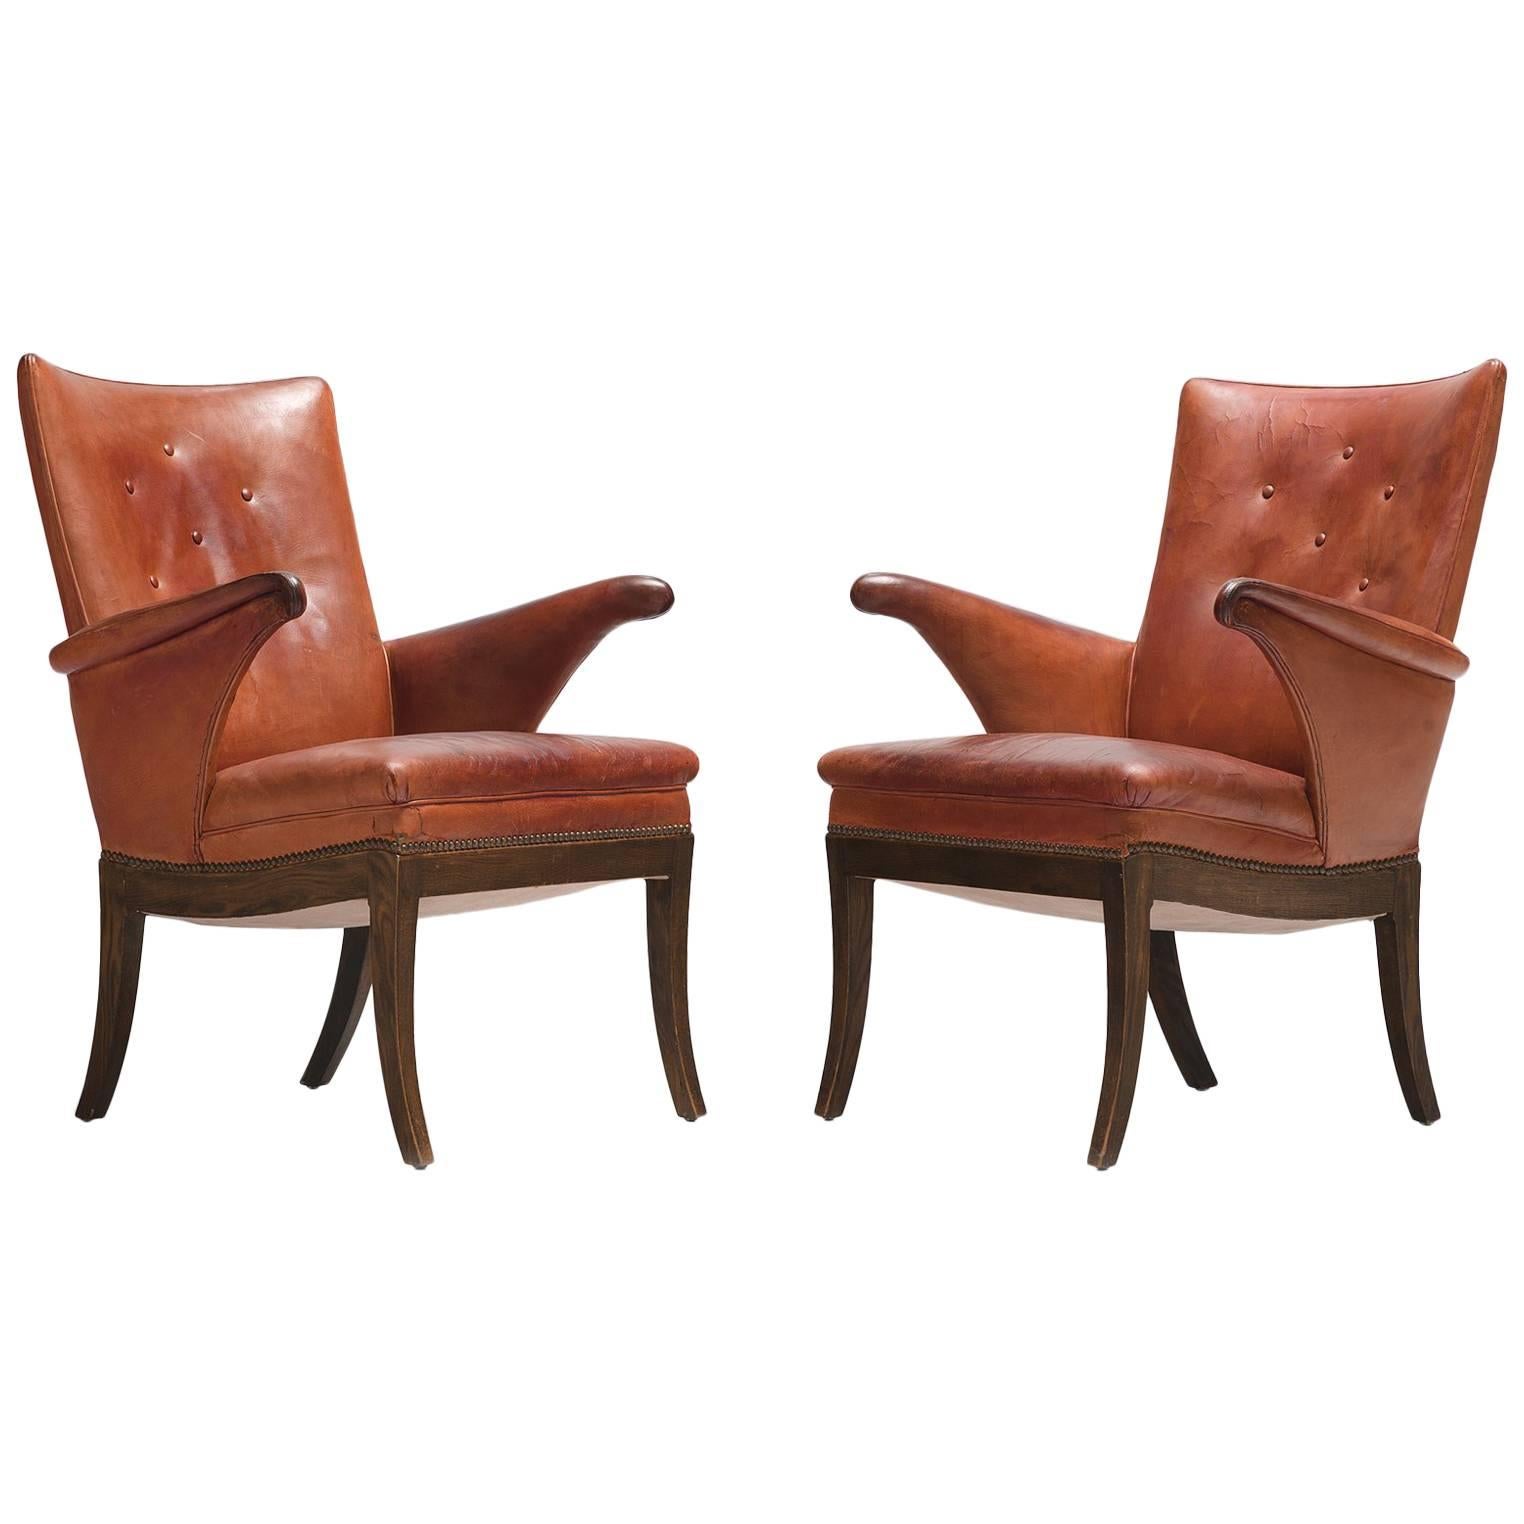 Frits Henningsen Pair of Cognac Leather Chairs, circa 1930